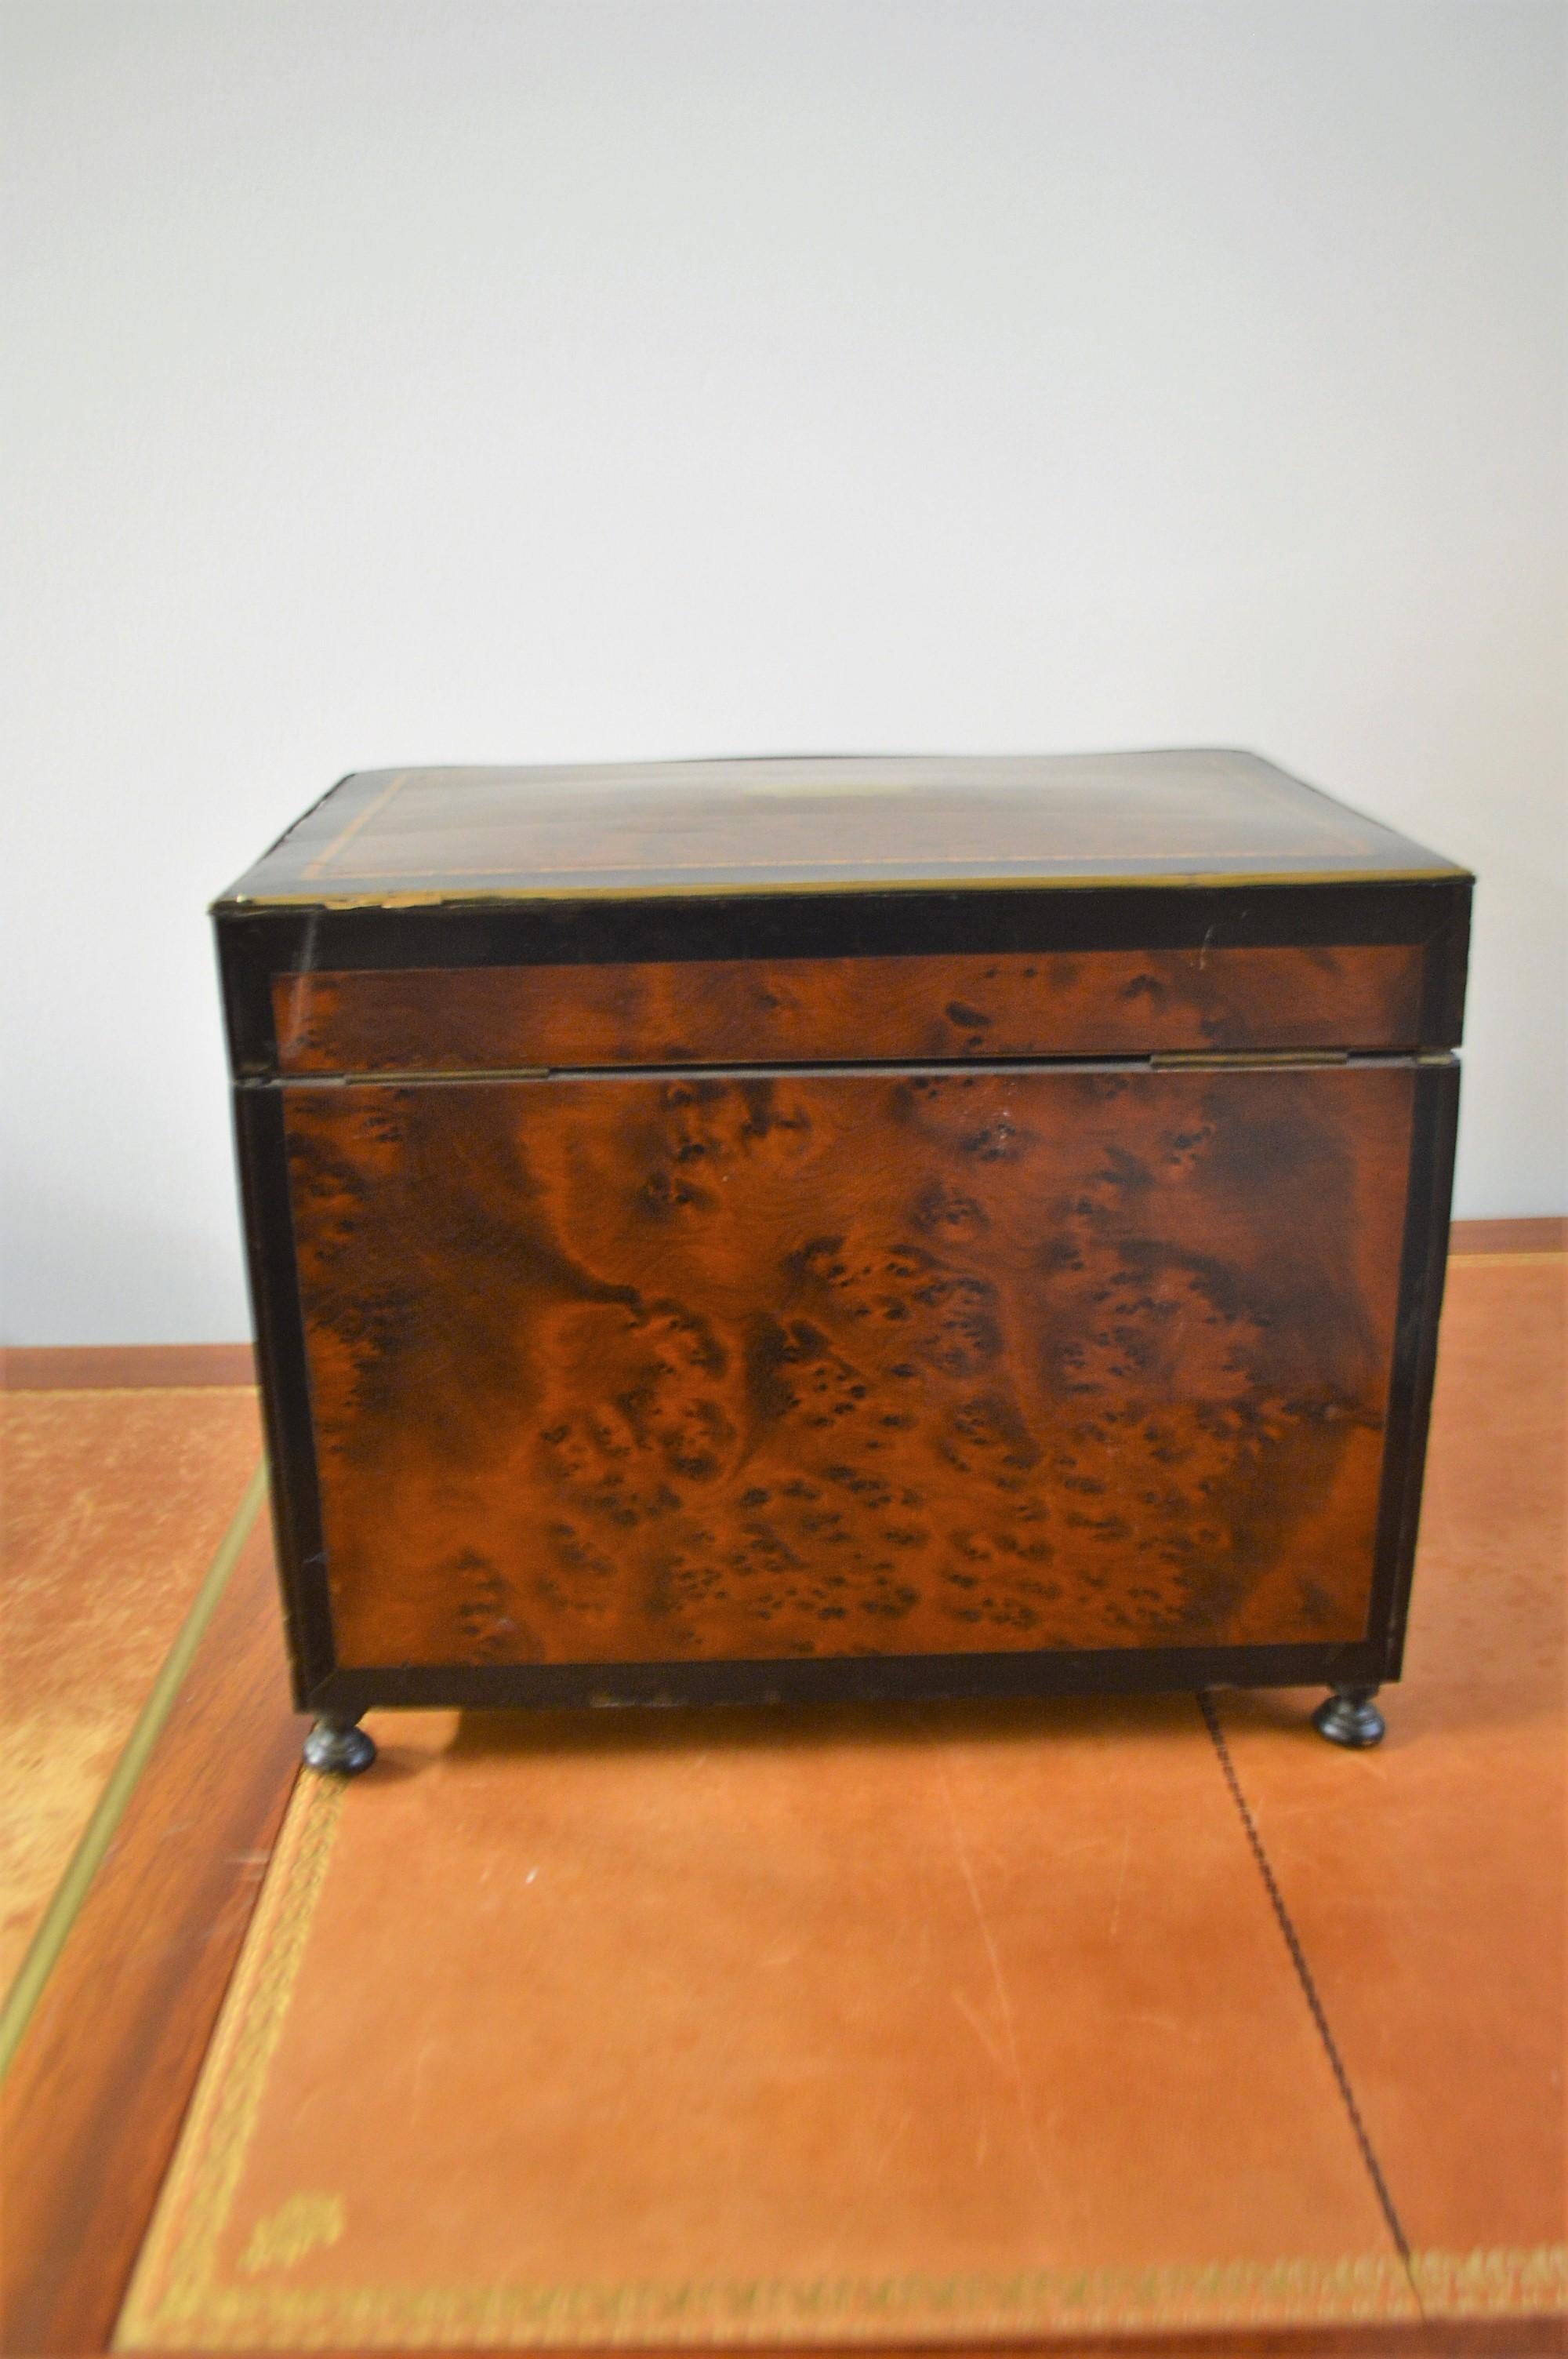 19th Century Portable Bar in a Burled Rosewood Box with Original Crystal Ware im Zustand „Gut“ im Angebot in Oakville, ON